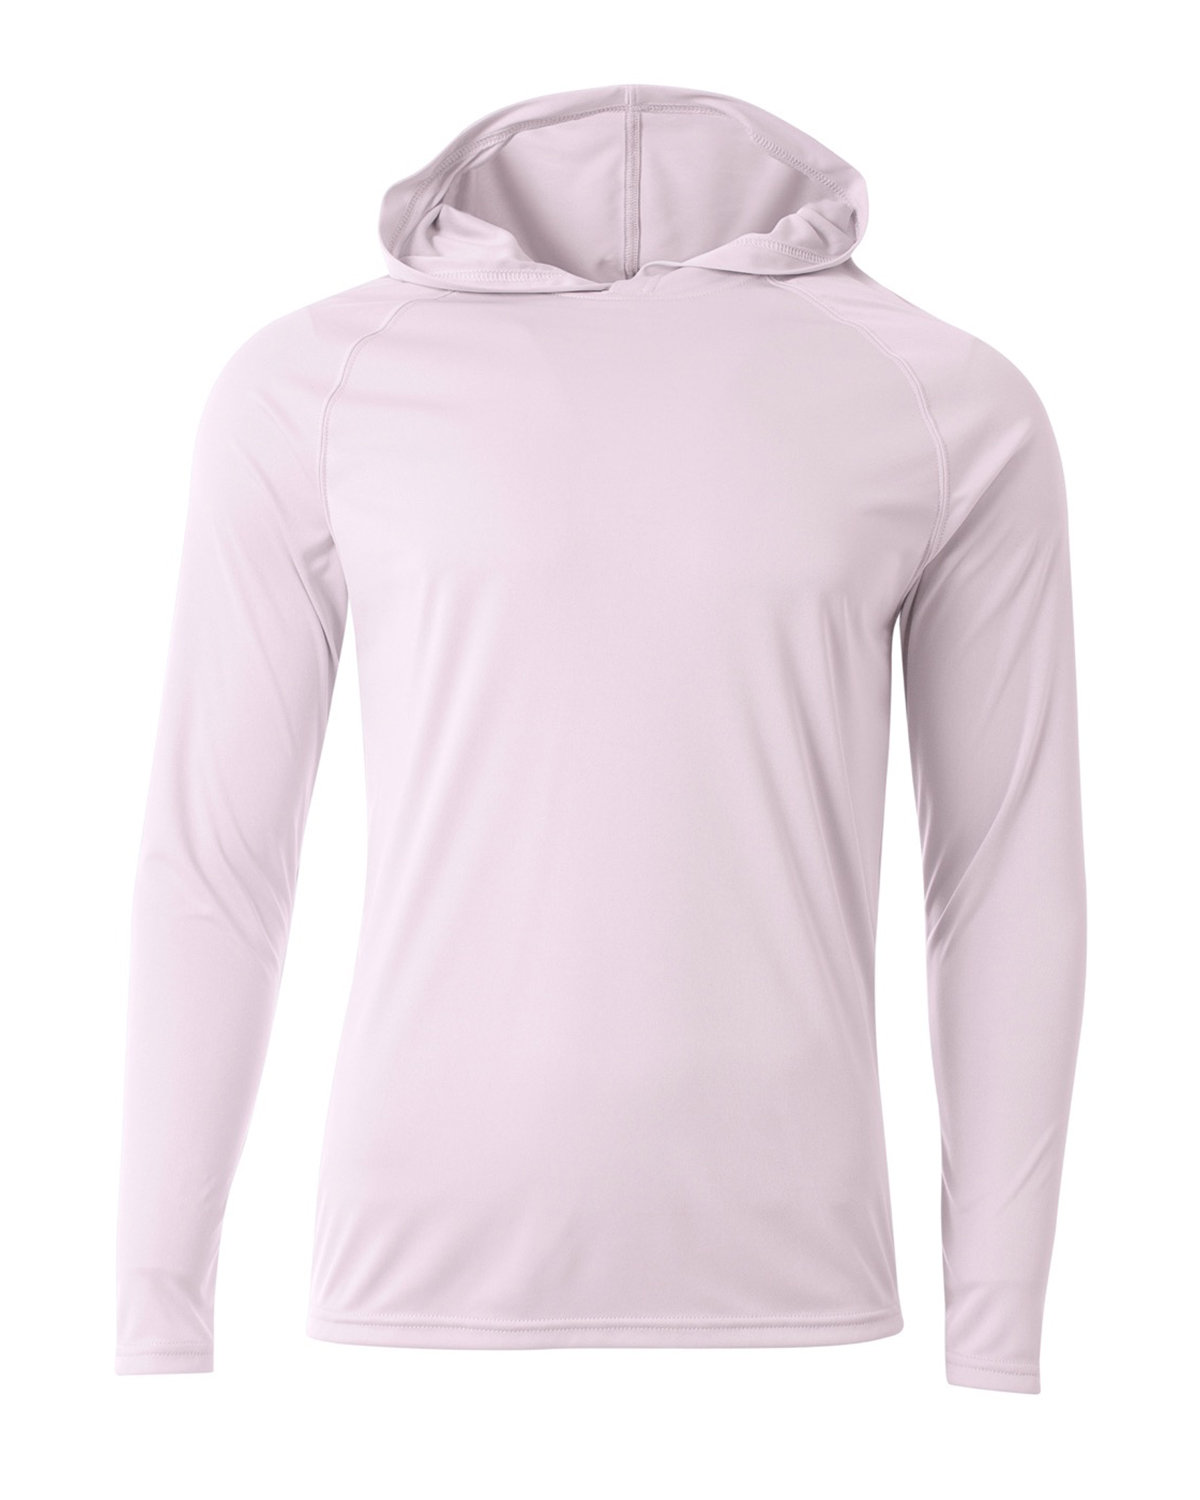 Mens Cooling Performance Long-Sleeve Hooded T-Shirt-A4